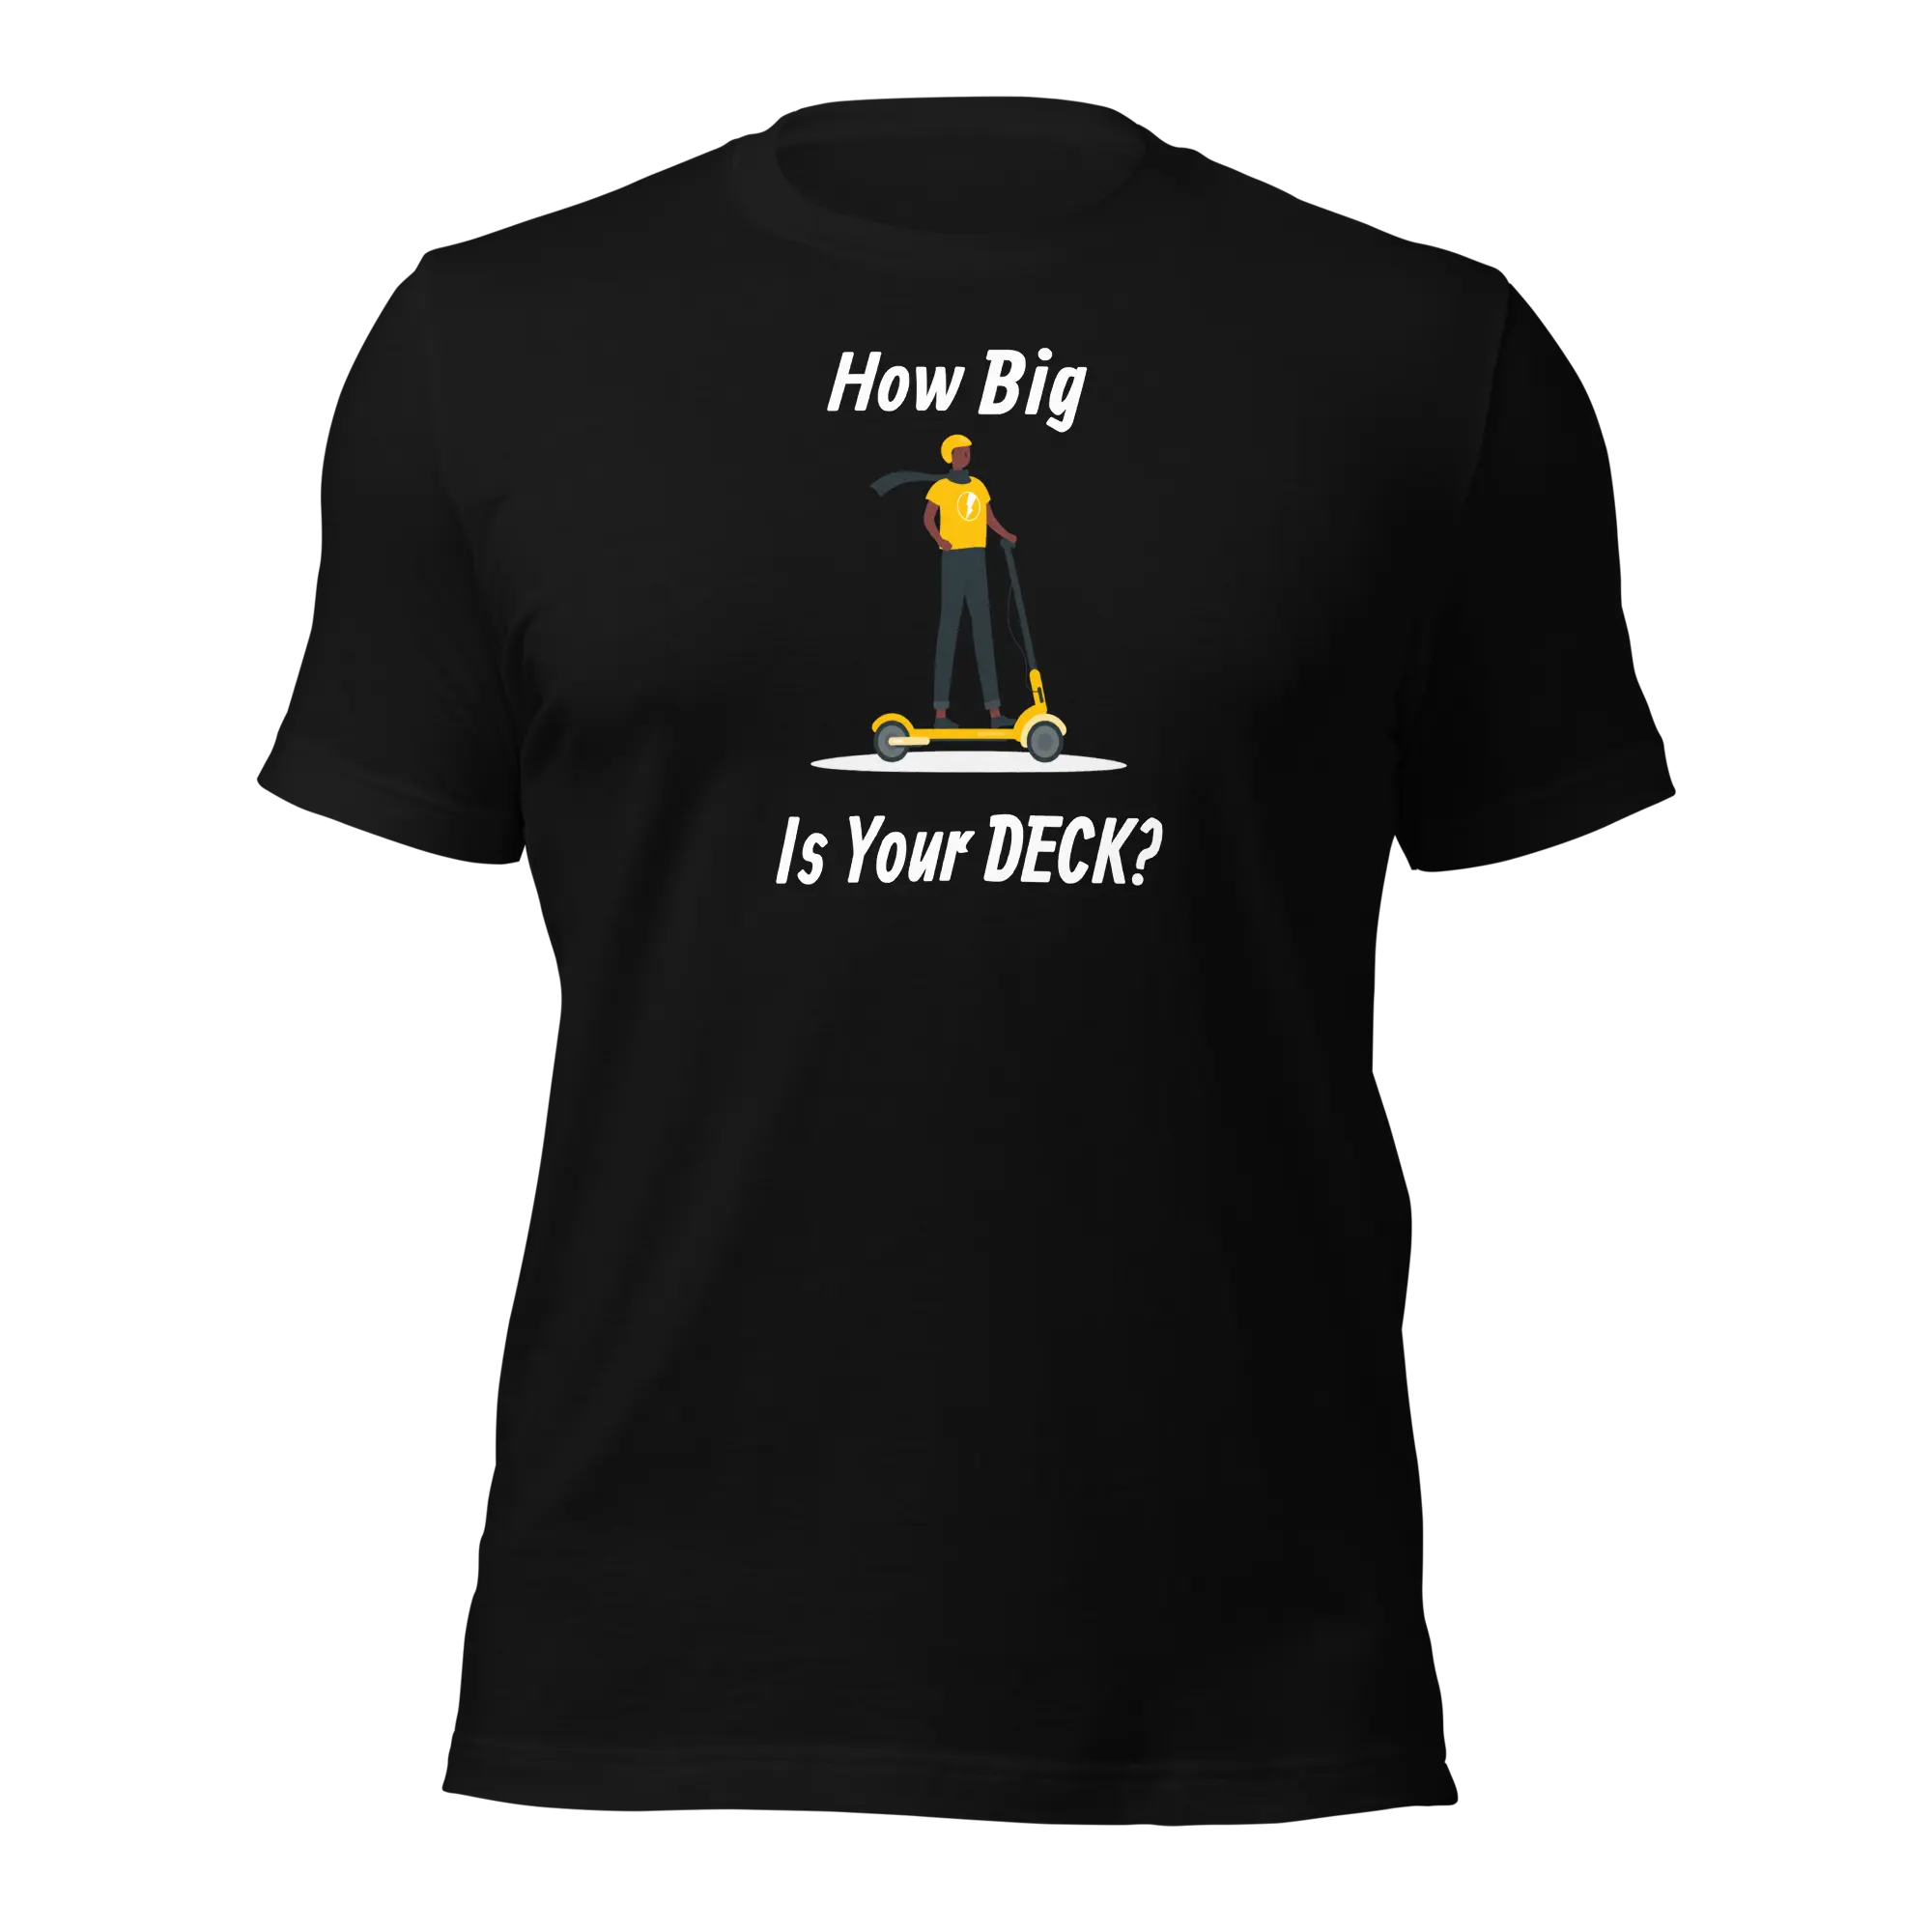 Funny T-Shirt: E-Scooter, How Big Is Your Deck? (Black)